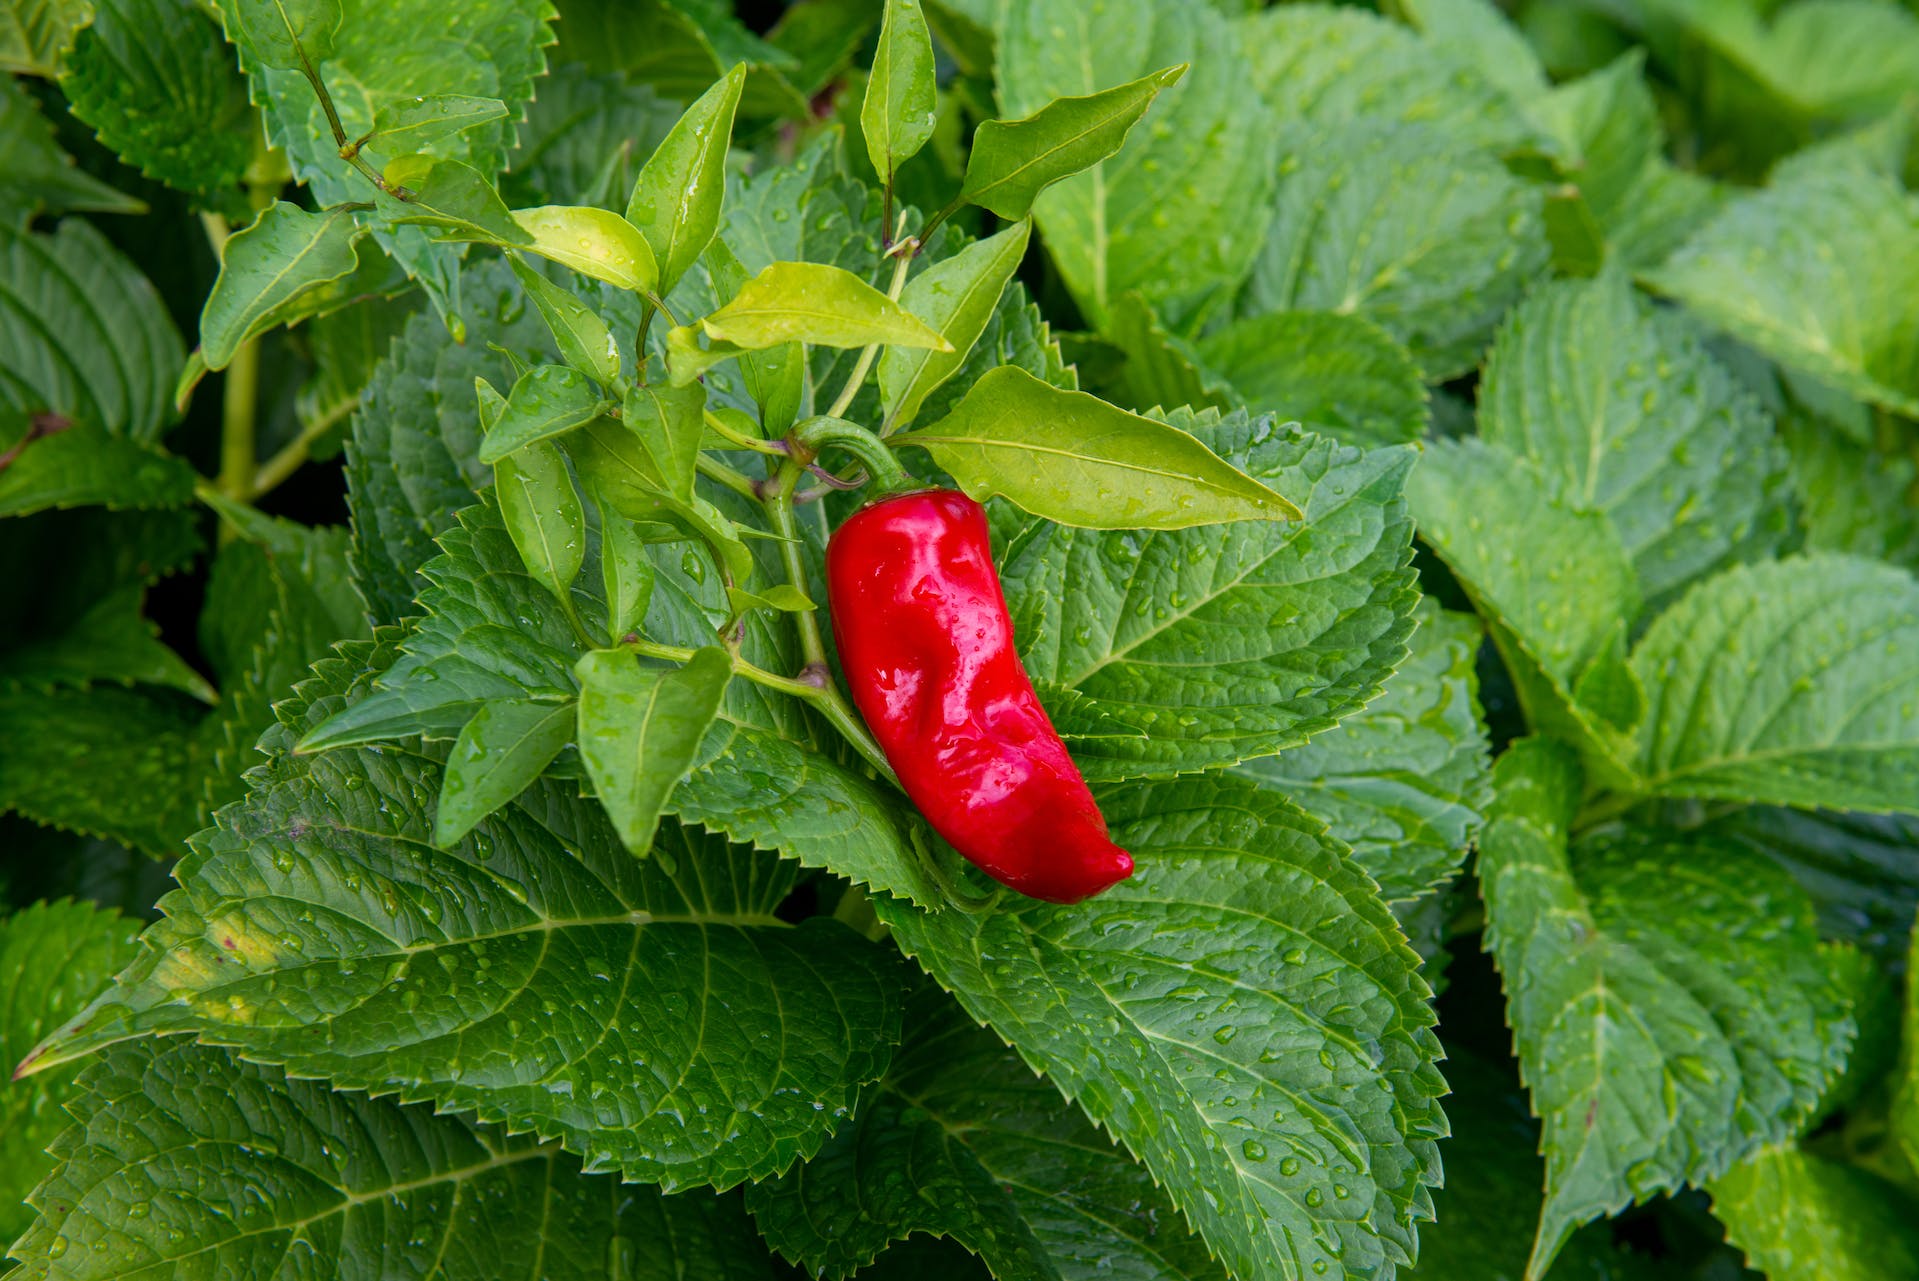 The ranking of the 5 hottest chili peppers - choose the spicy variety that suits you